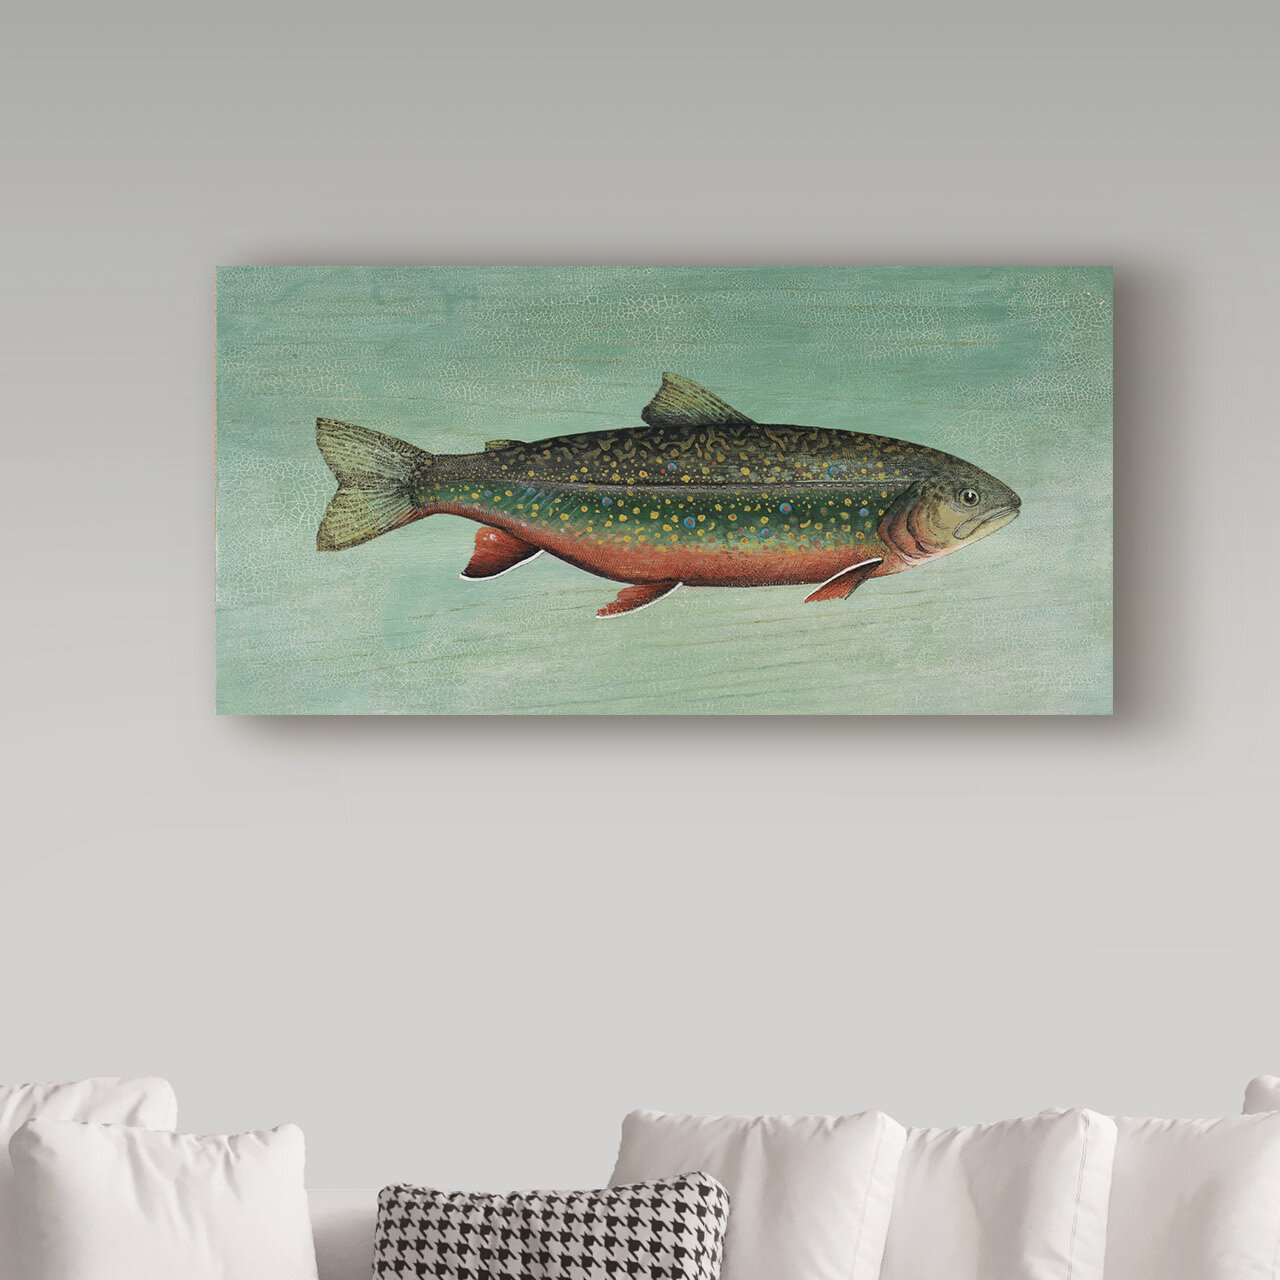 Trout' Acrylic Painting Print On Wrapped Canvas Highland Dunes Size: 24 H x 47 W